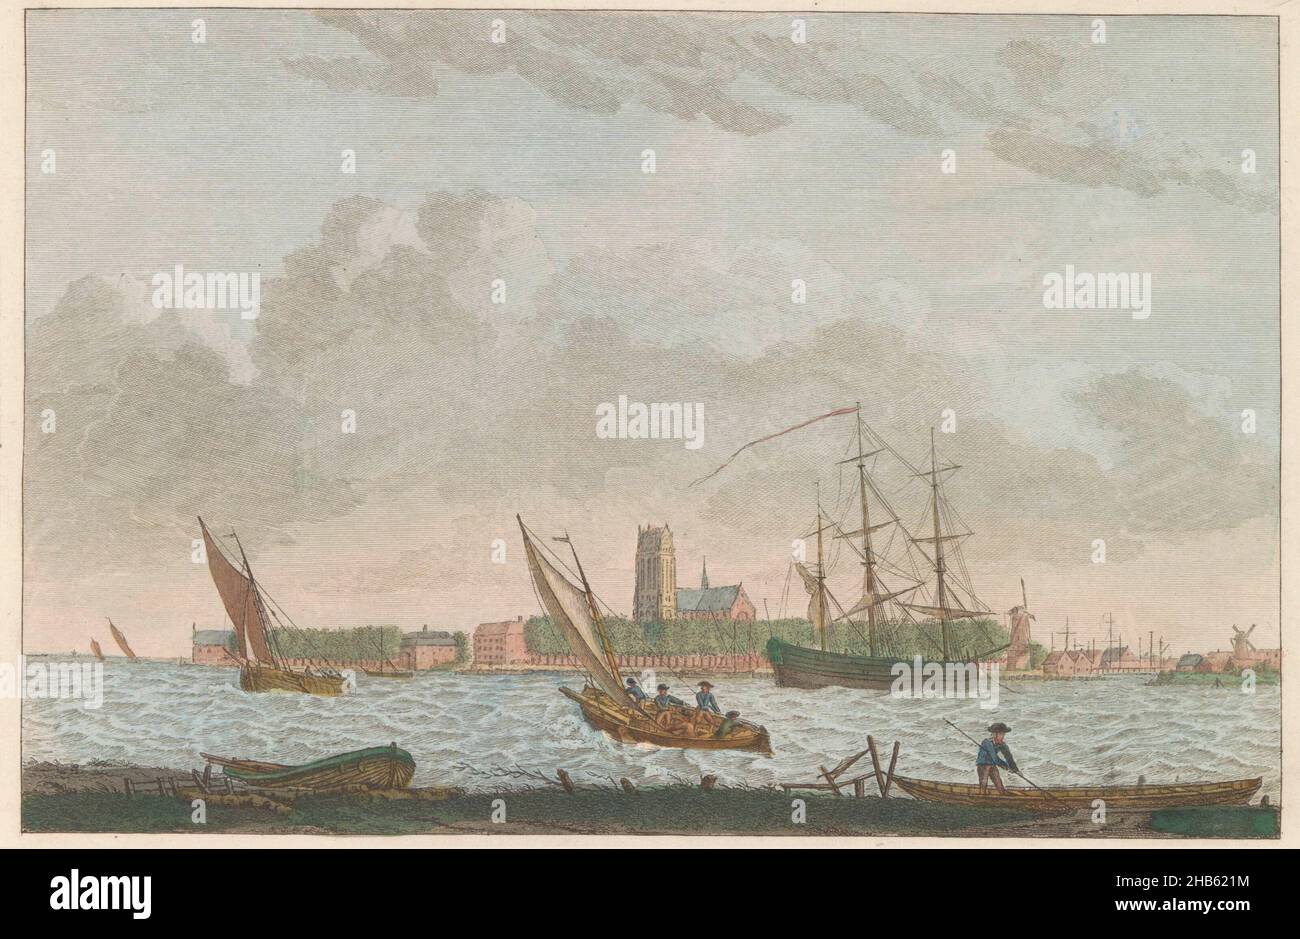 Dordrecht from the Merwede, ca. 1790, Dordrecht seen from the Merwe, La ville Dordrecht - prise du coté dela riviere dite la Merwe (title on object), View of Dordrecht from the Merwede, ca. 1790. Part of a plate work from c. 1824-1825 containing 74 (unnumbered) plates of the most important topographical views and various customs in the United Kingdom of the Netherlands., print maker: Carel Frederik Bendorp (I), intermediary draughtsman: Jan Bulthuis, print maker: Netherlands, publisher: Amsterdam, 1786 - 1792 and/or 1824 - 1825, paper, etching, engraving, height 172 mm × width 243 mm Stock Photo